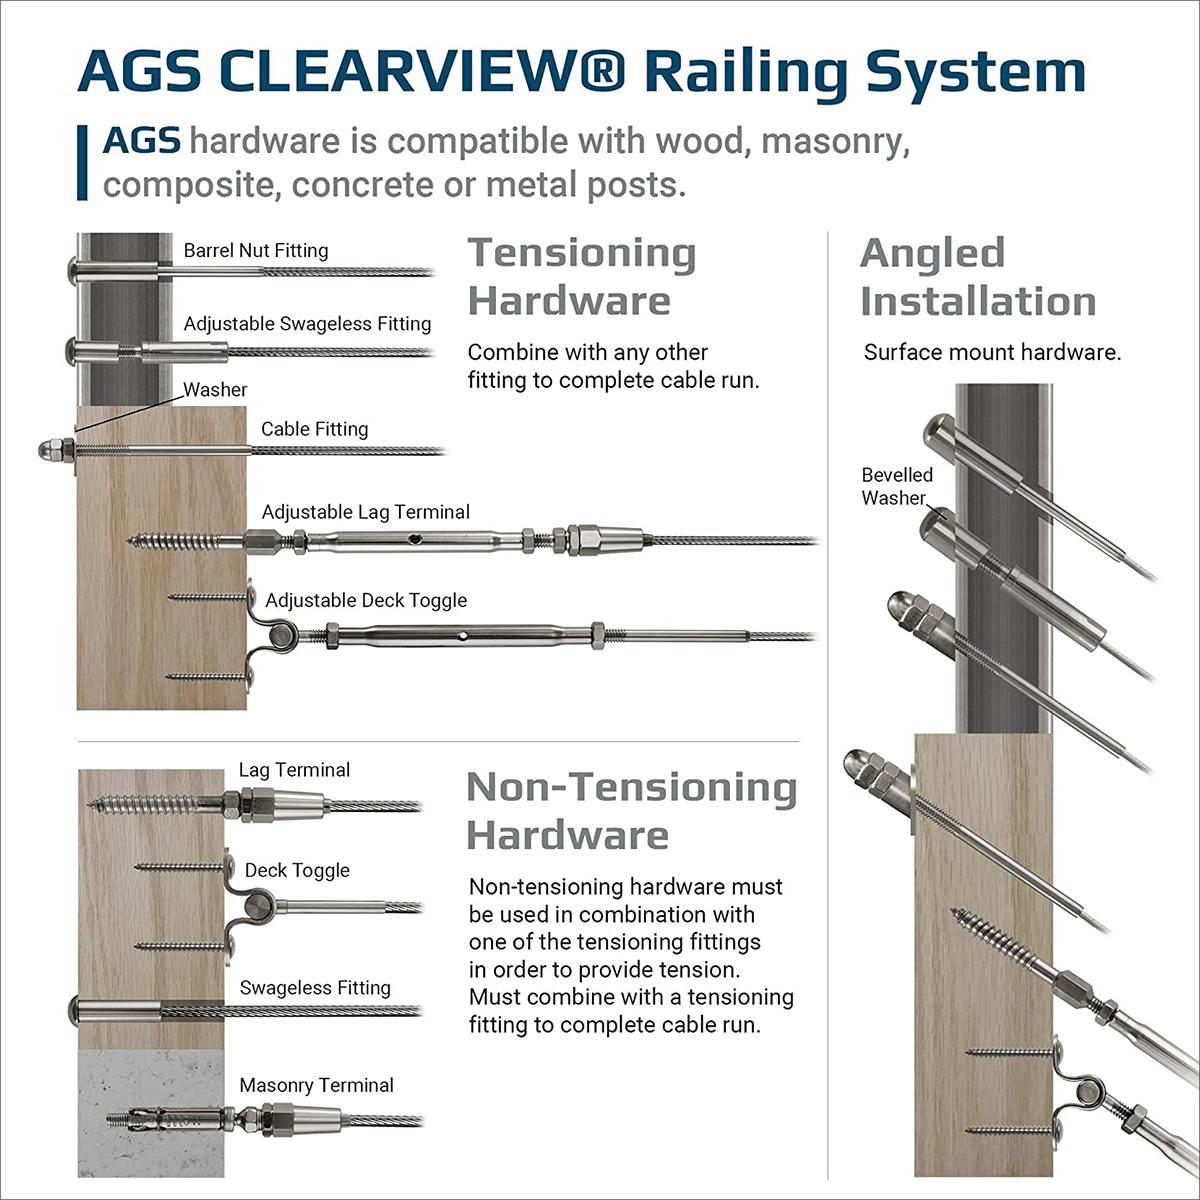 This infographic includes various types of hardware that AGS Stainless sells for cable railing systems